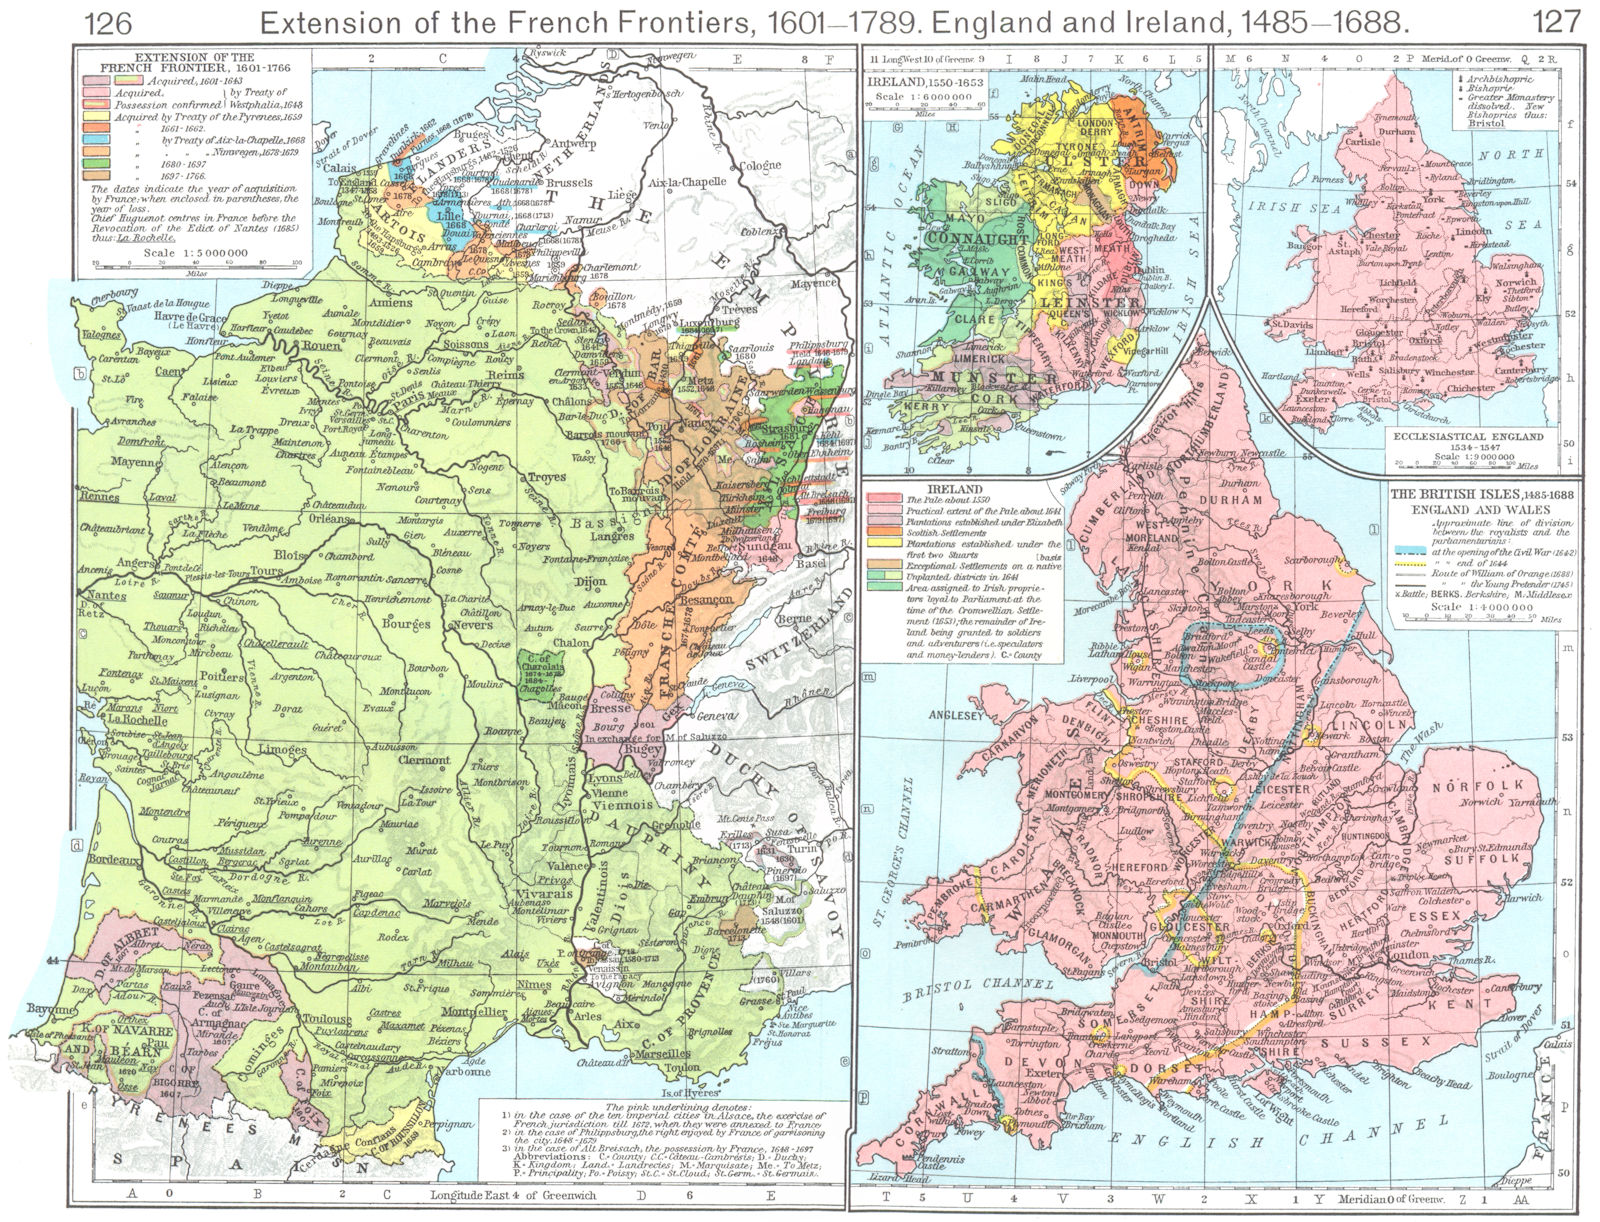 FRANCE. Frontiers, 1601-1766; British Isles, 1485-1688; Ecclesiastical 1956 map